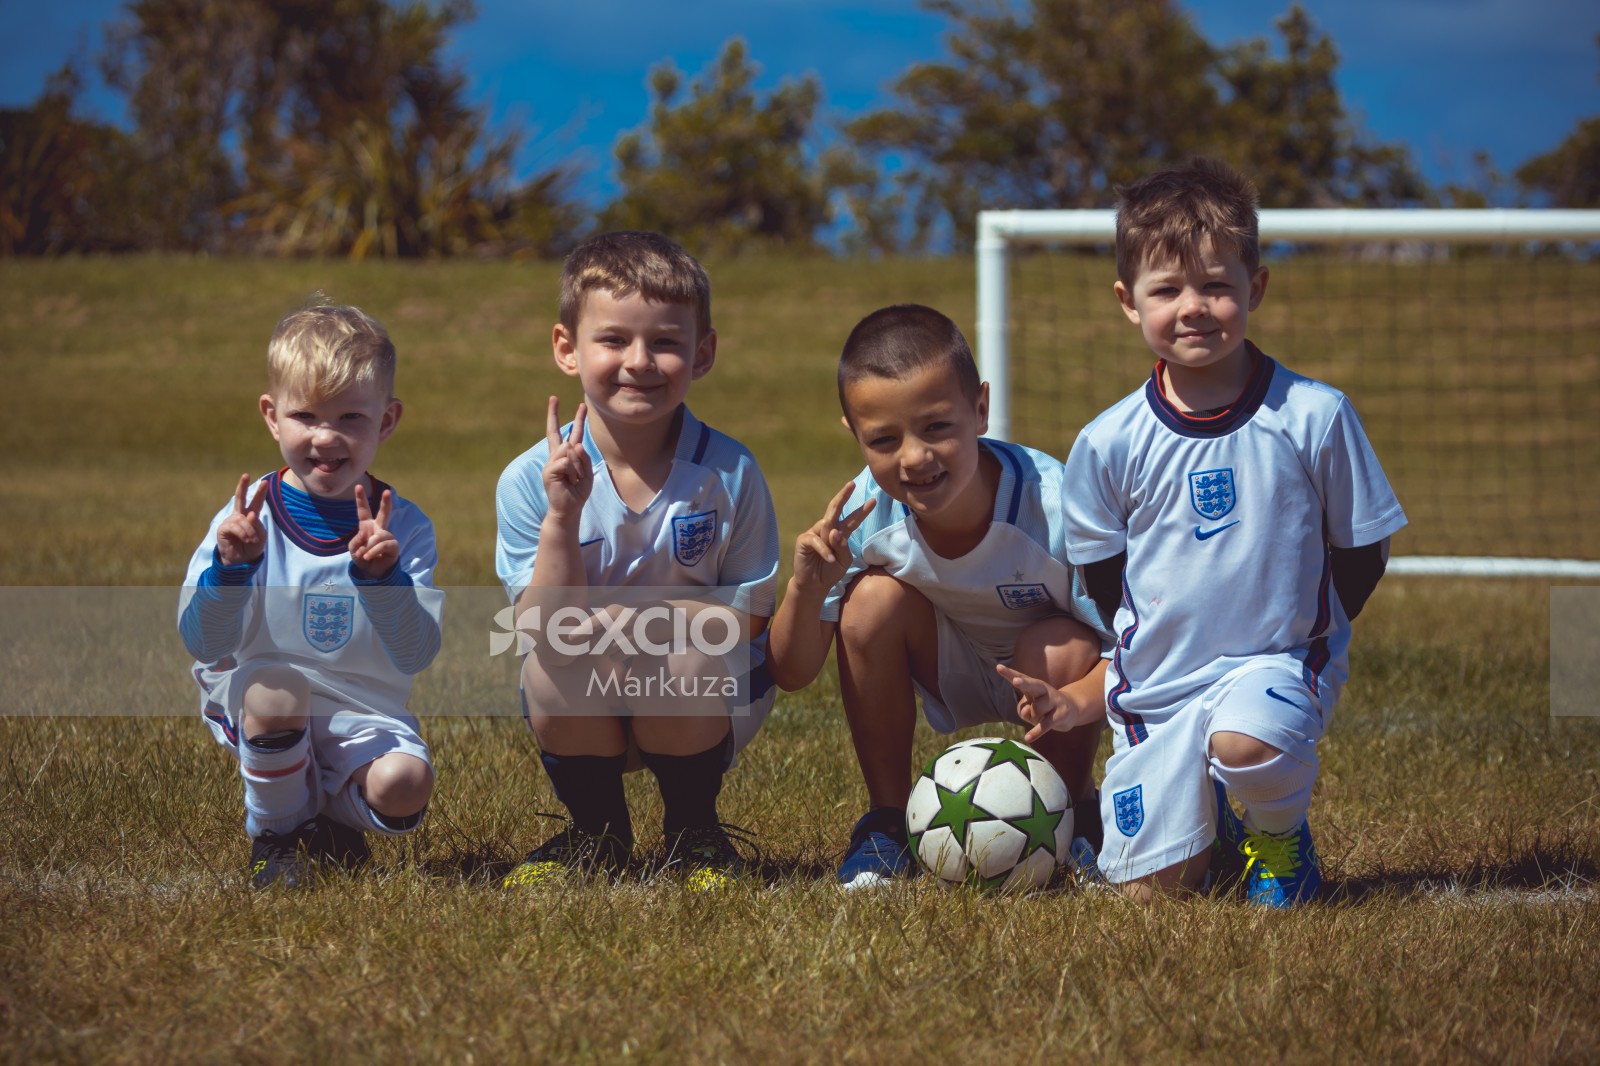 Four boys wearing England kit posing for a photo - Little Dribblers